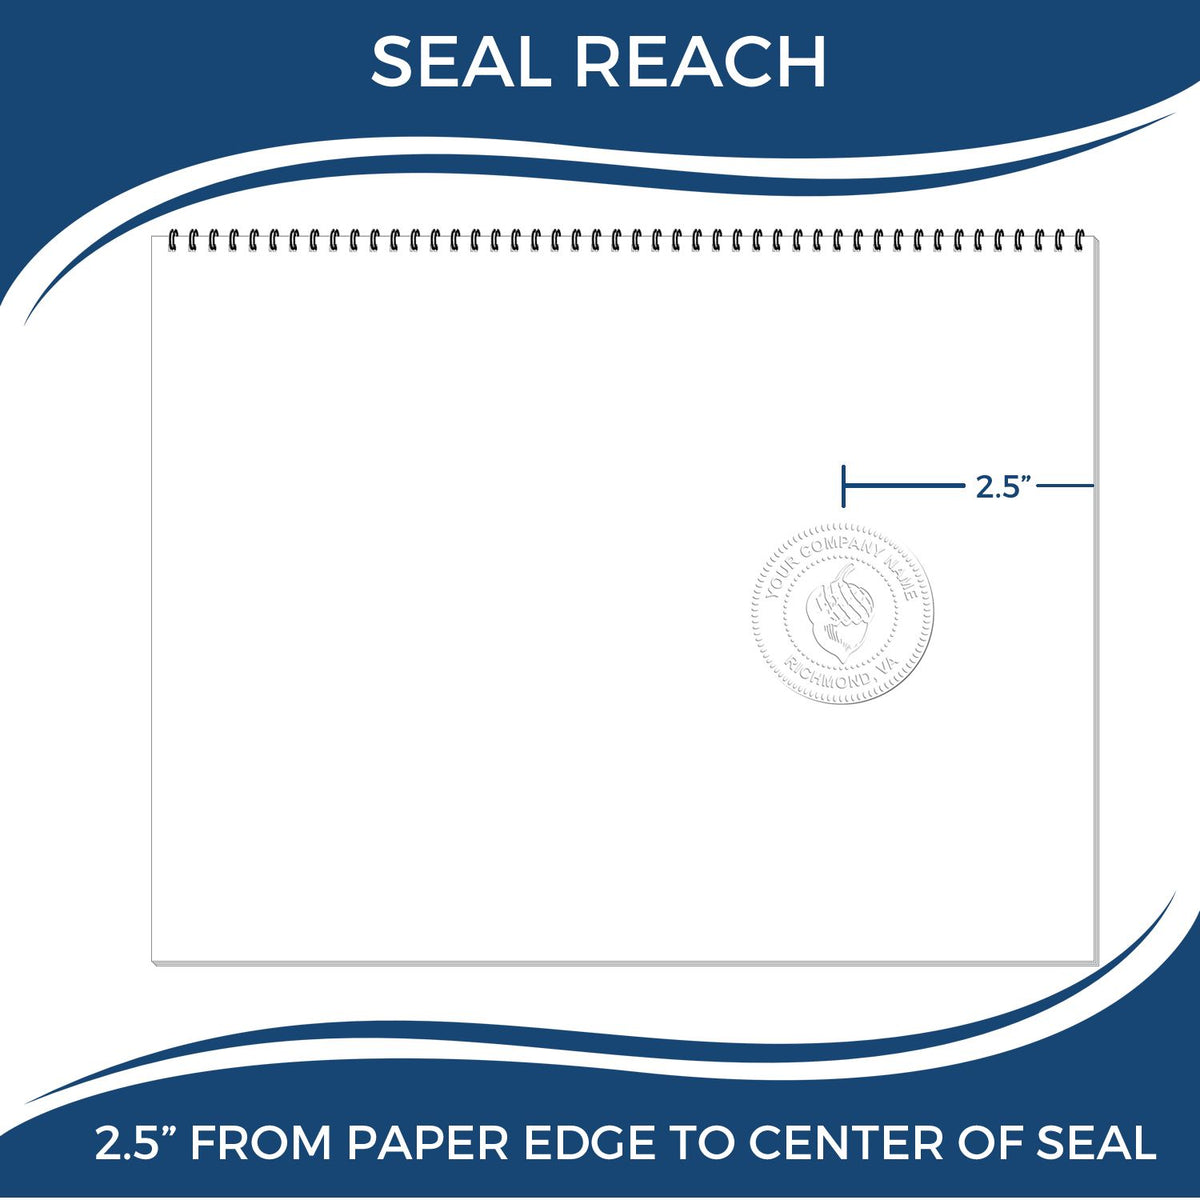 An infographic showing the seal reach which is represented by a ruler and a miniature seal image of the Heavy Duty Cast Iron Texas Engineer Seal Embosser